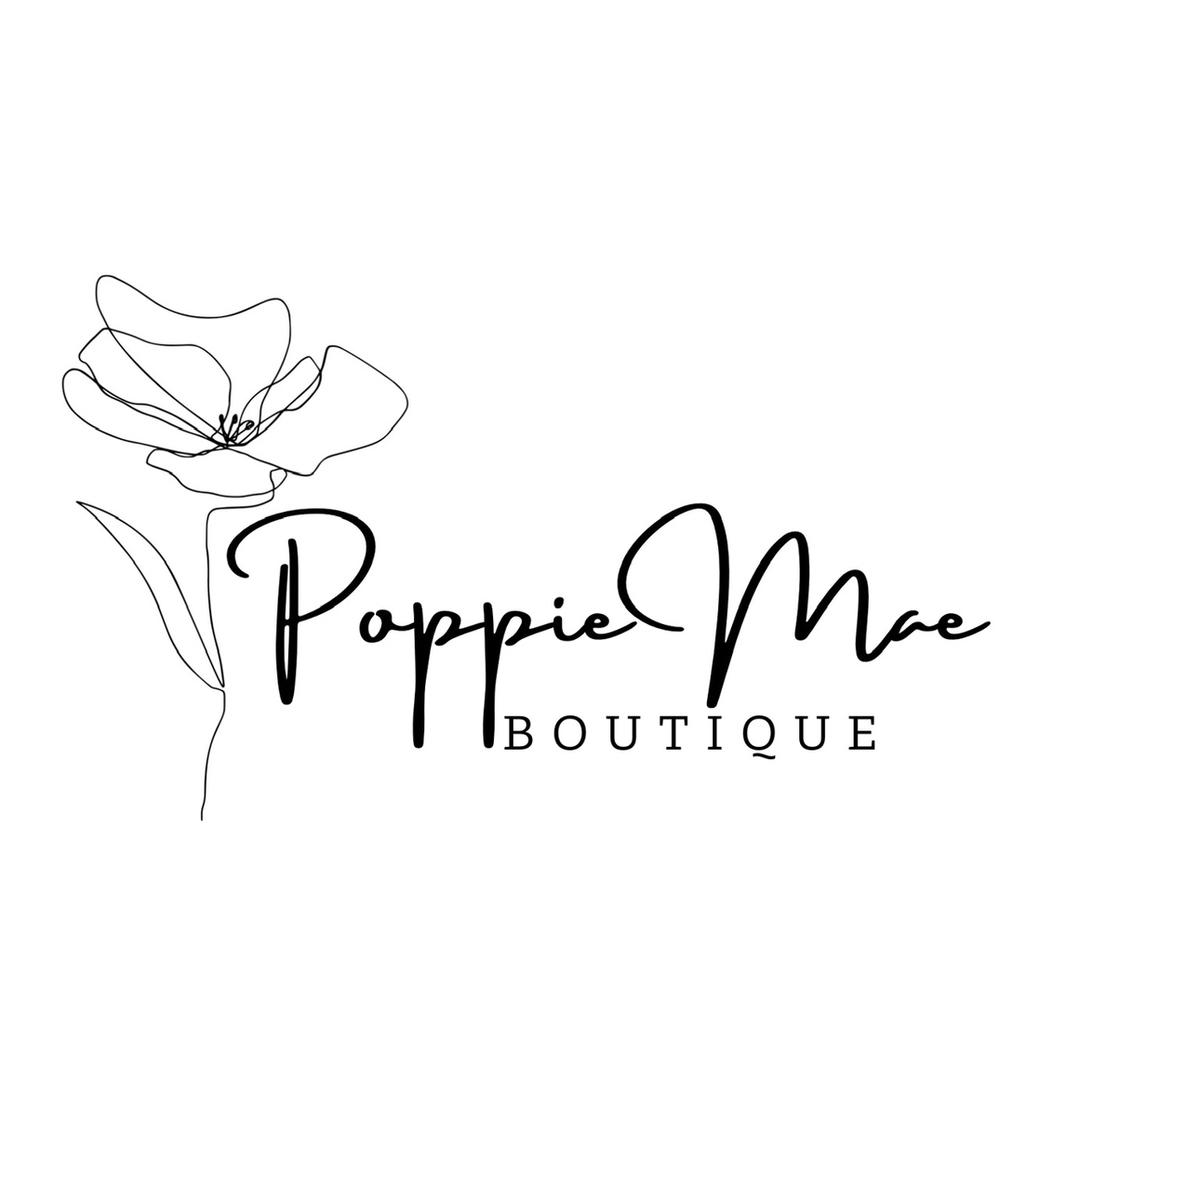 Poppie Mae 's images